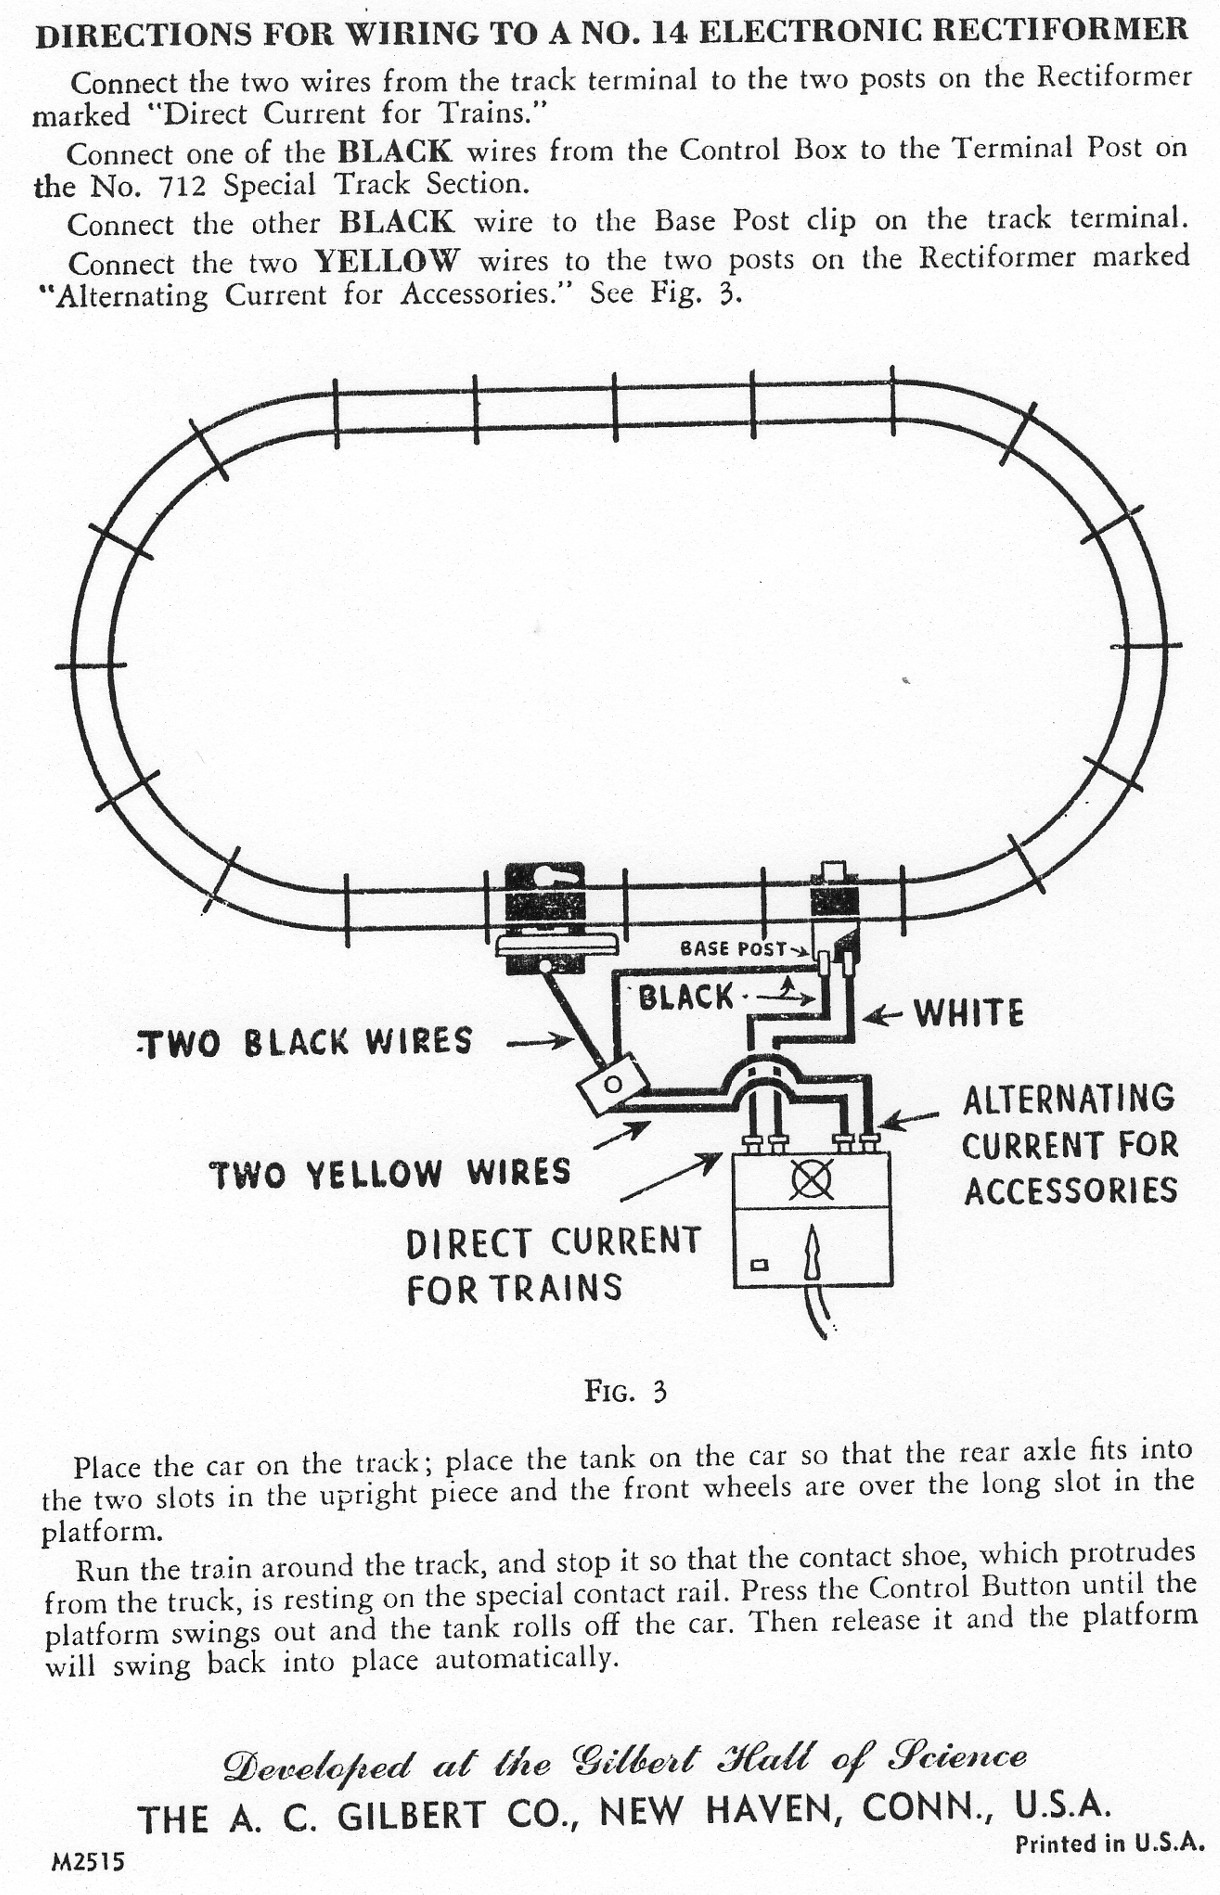 Directions For Wiring To A No. 14 Electronic Rectiformer